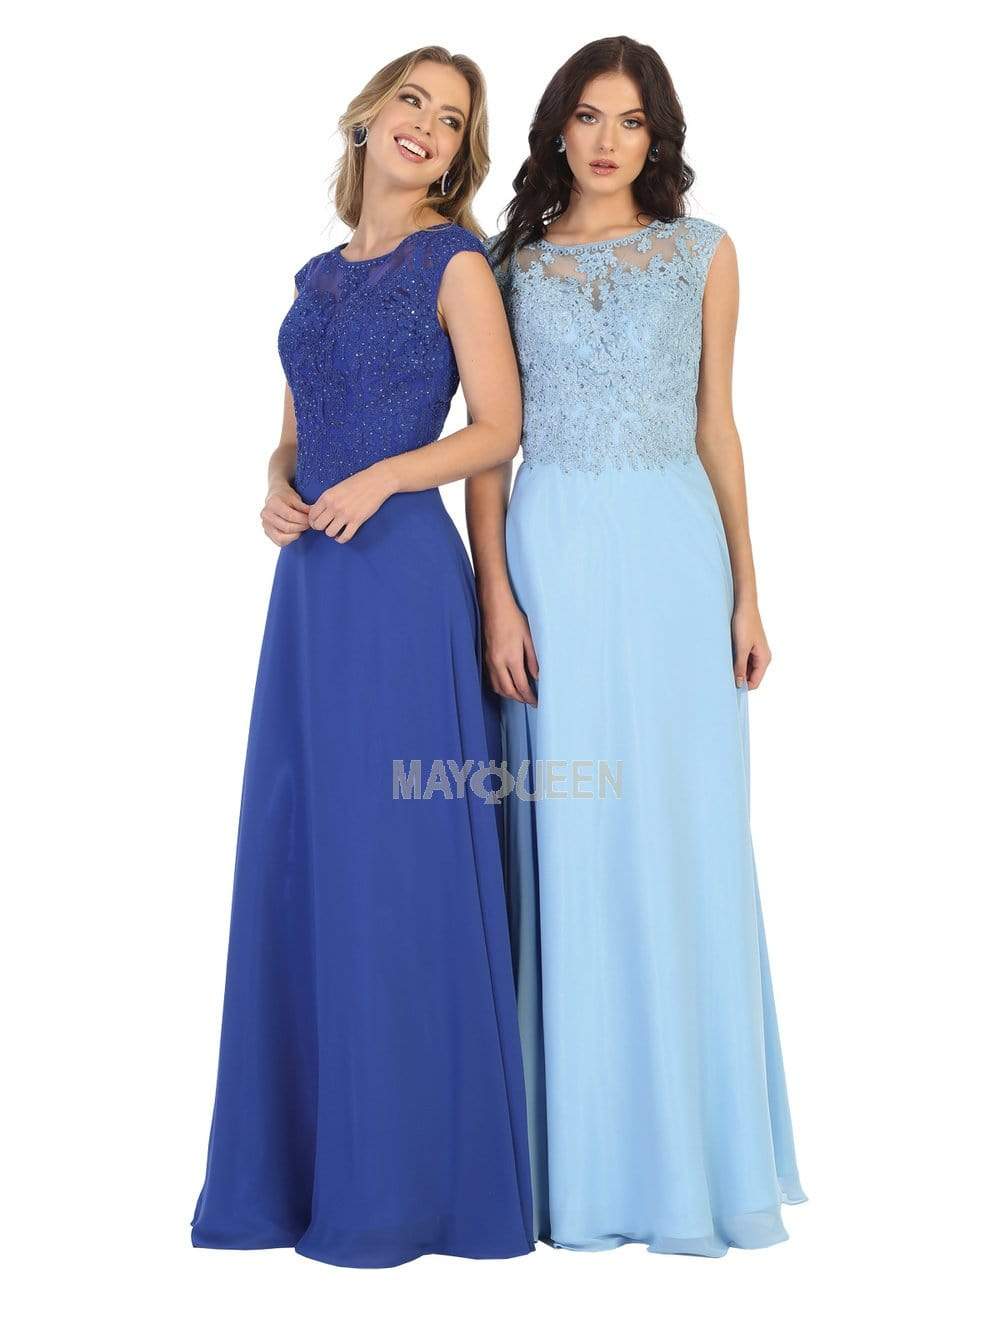 May Queen - MQ1725 Lace Bodice Chiffon A-Line Long Formal Dress Mother of the Bride Dresses 4 / Royal